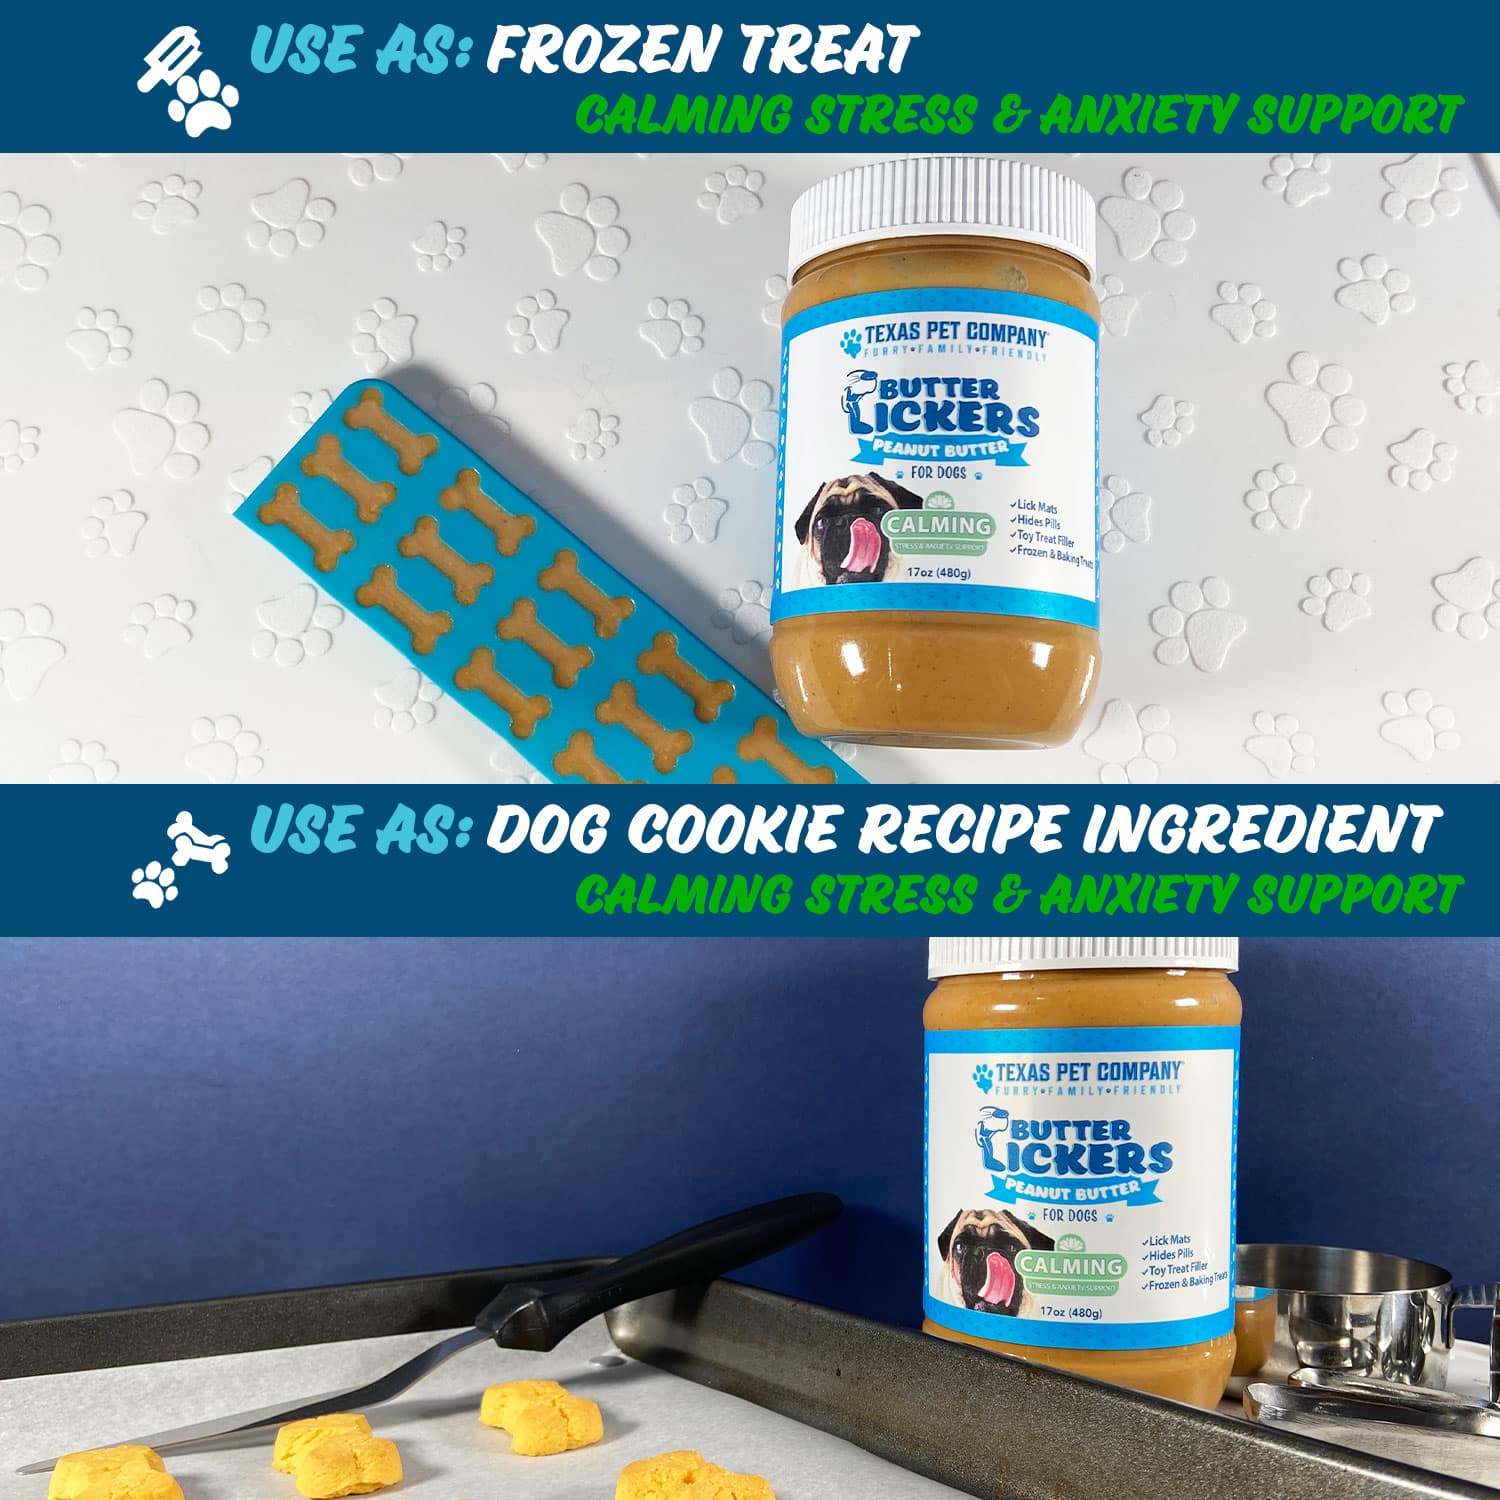 https://texaspetcompany.com/wp-content/uploads/2022/04/Butter-Lickers-Calming-Peanut-Butter-For-Dogs-Use-Freeze-Bake.jpg